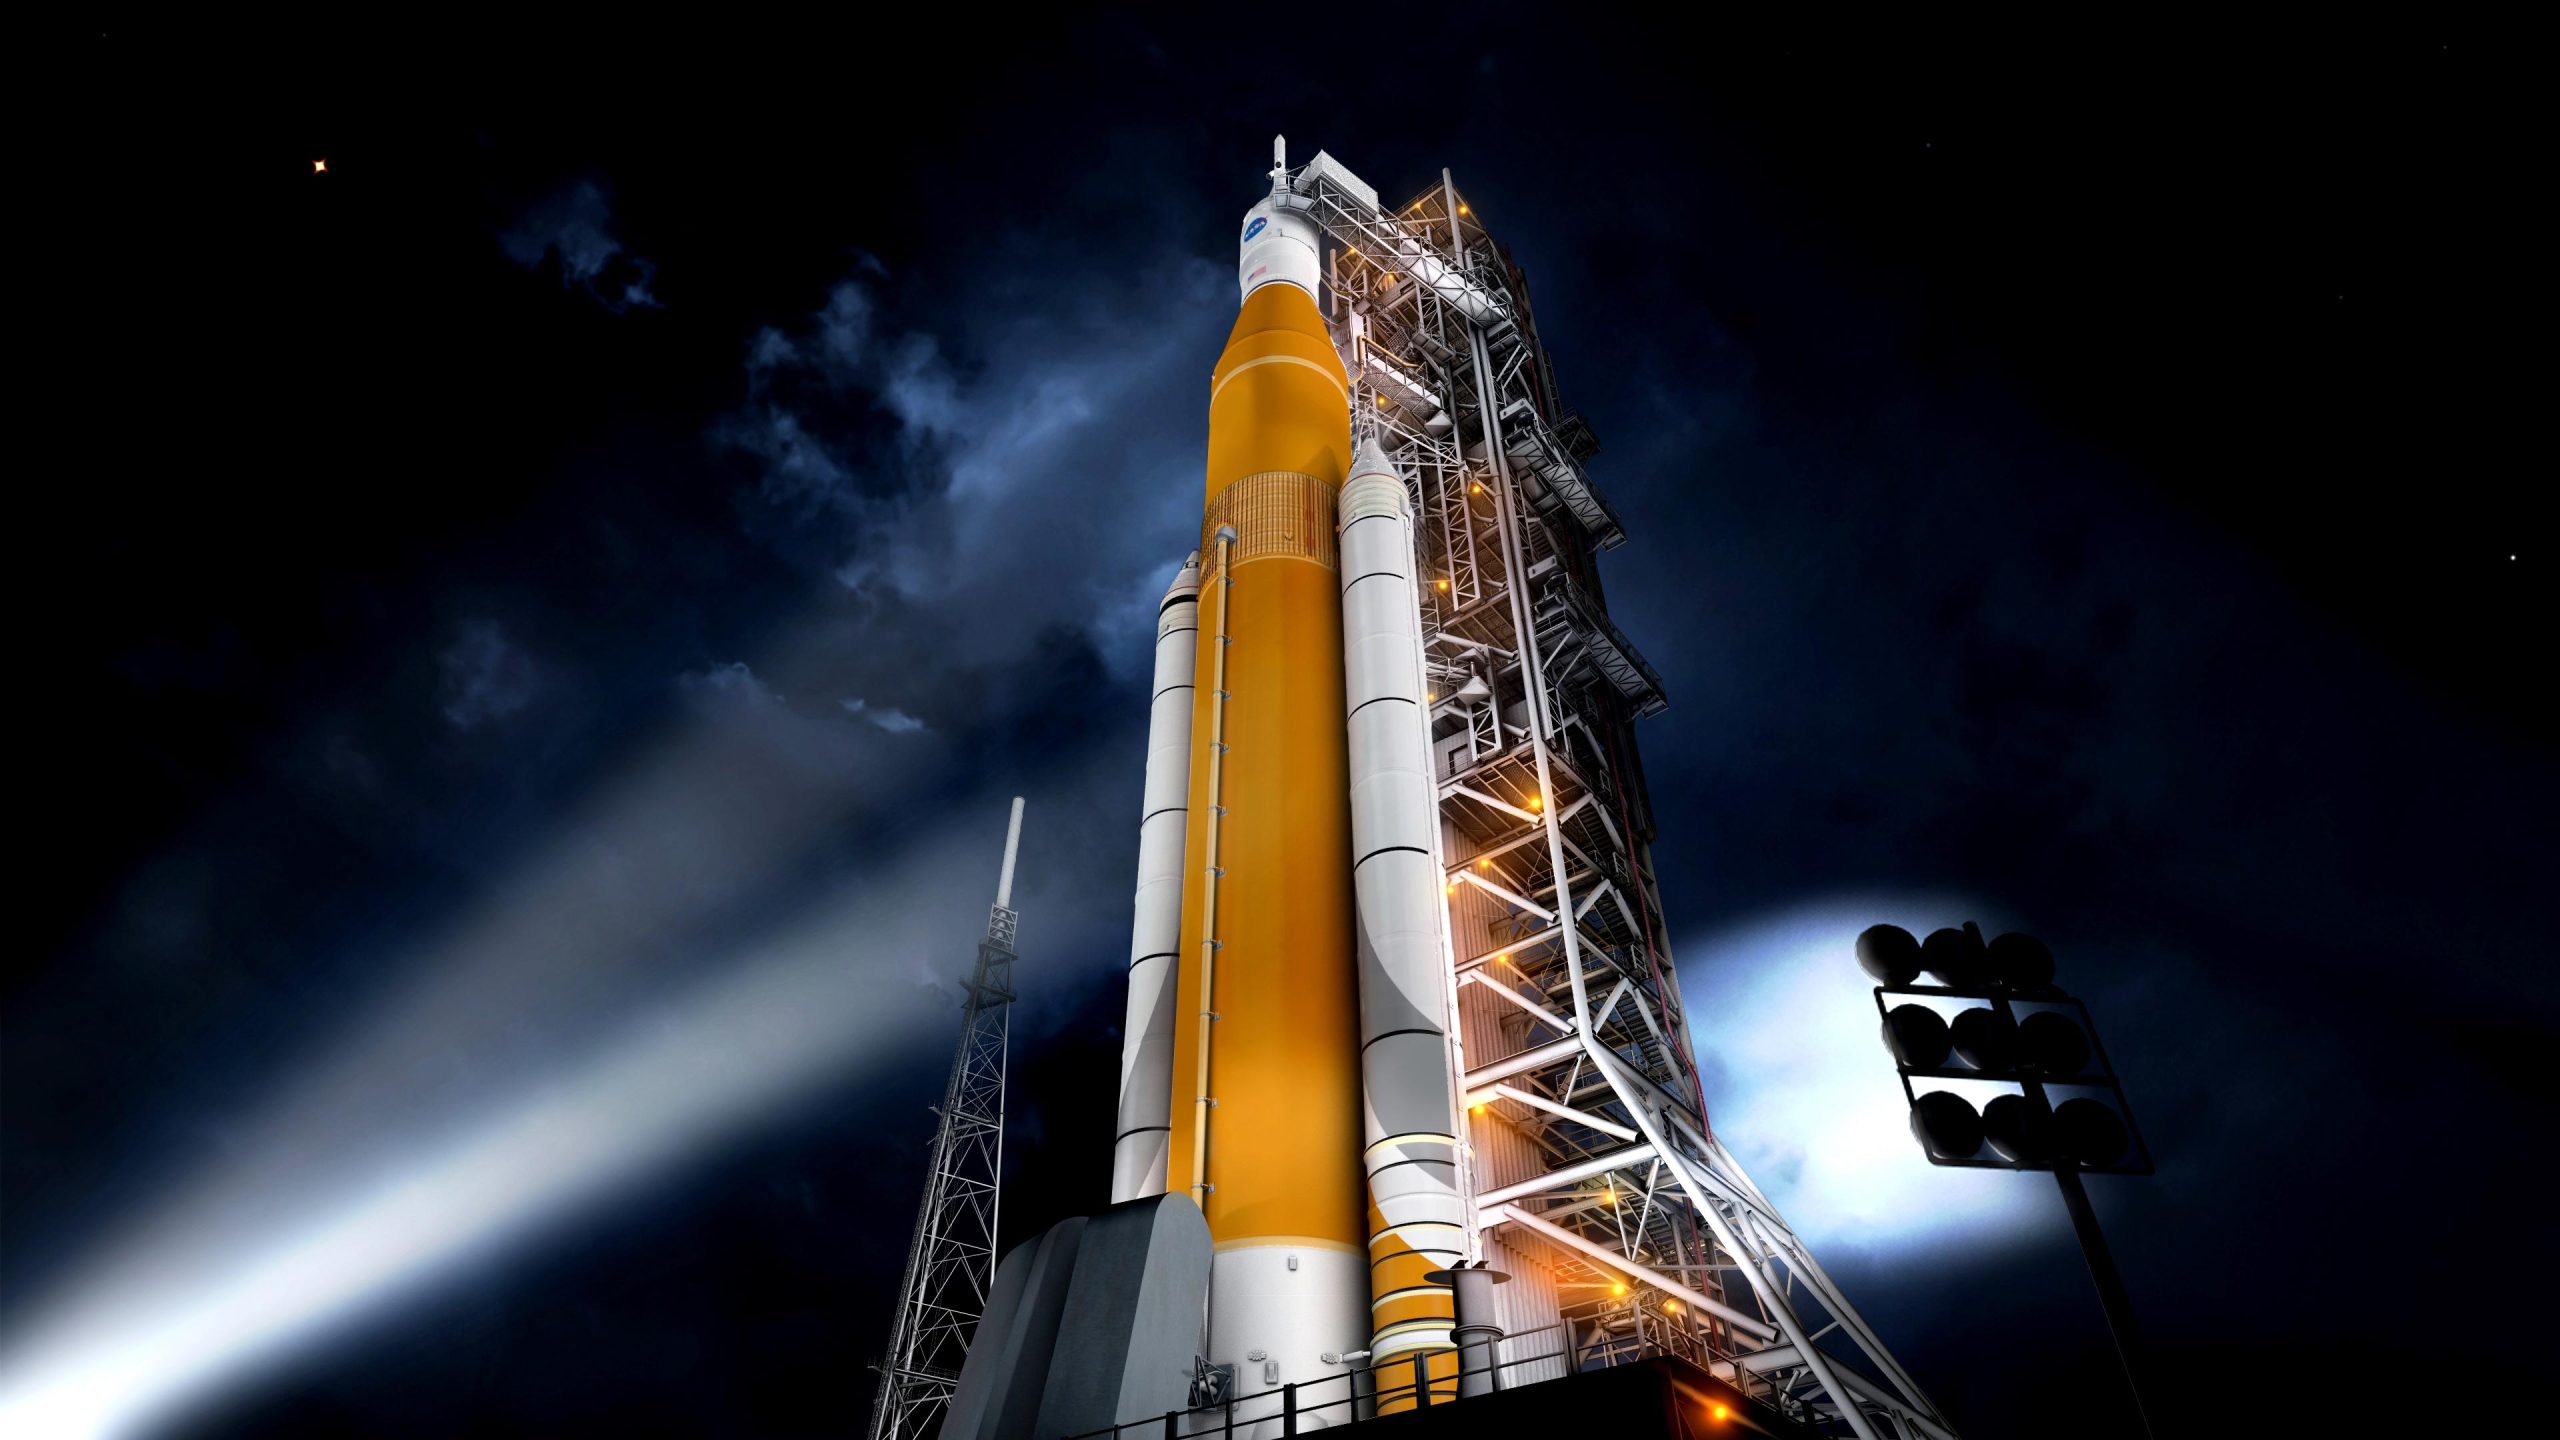 SLS Rocket and Orion Spacecraft scaled